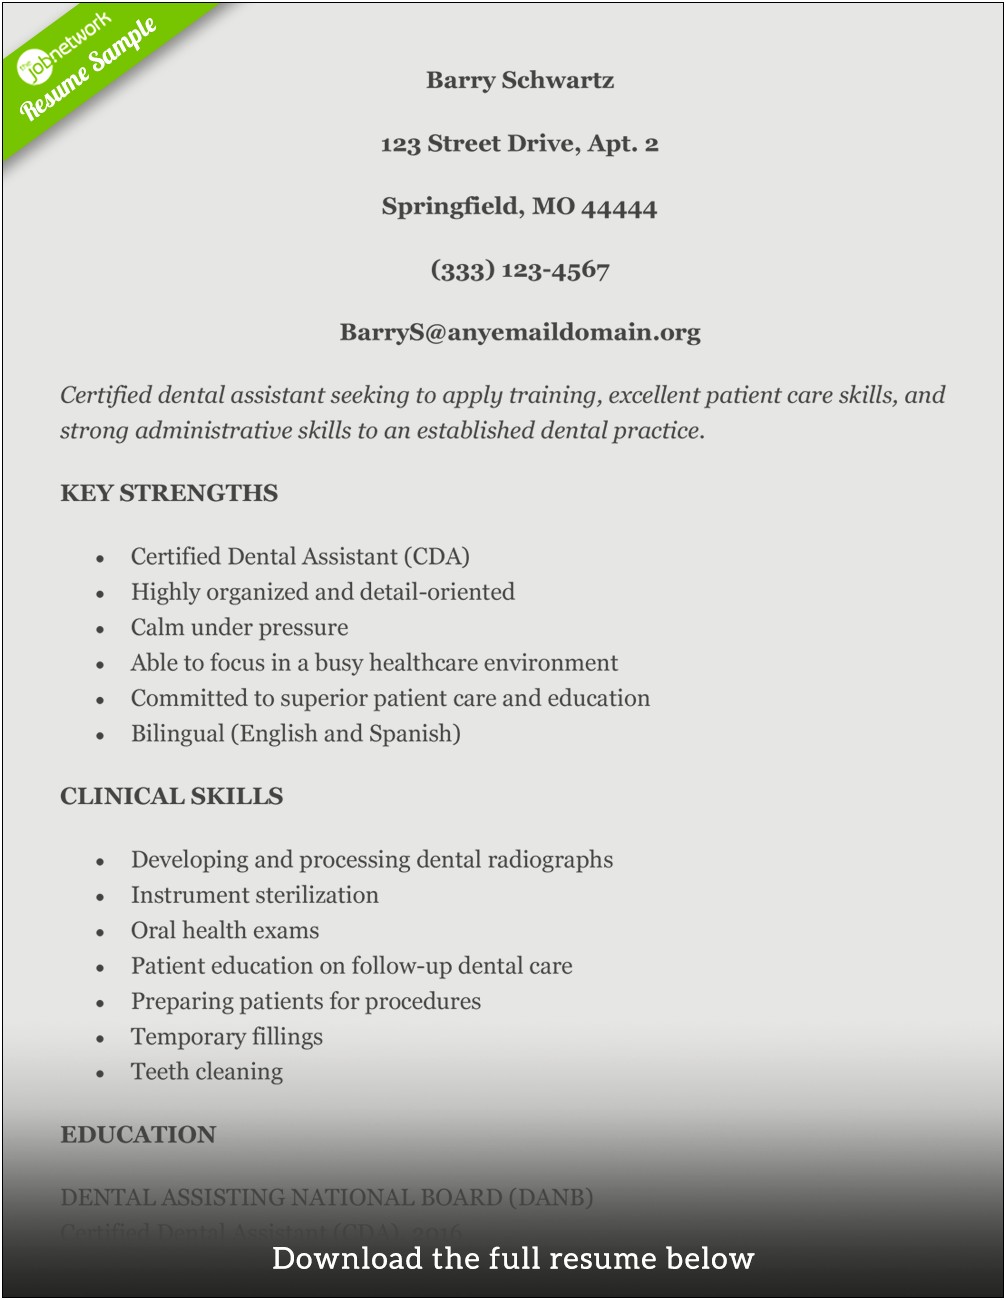 Resume For Student Just Graduating From Dental School